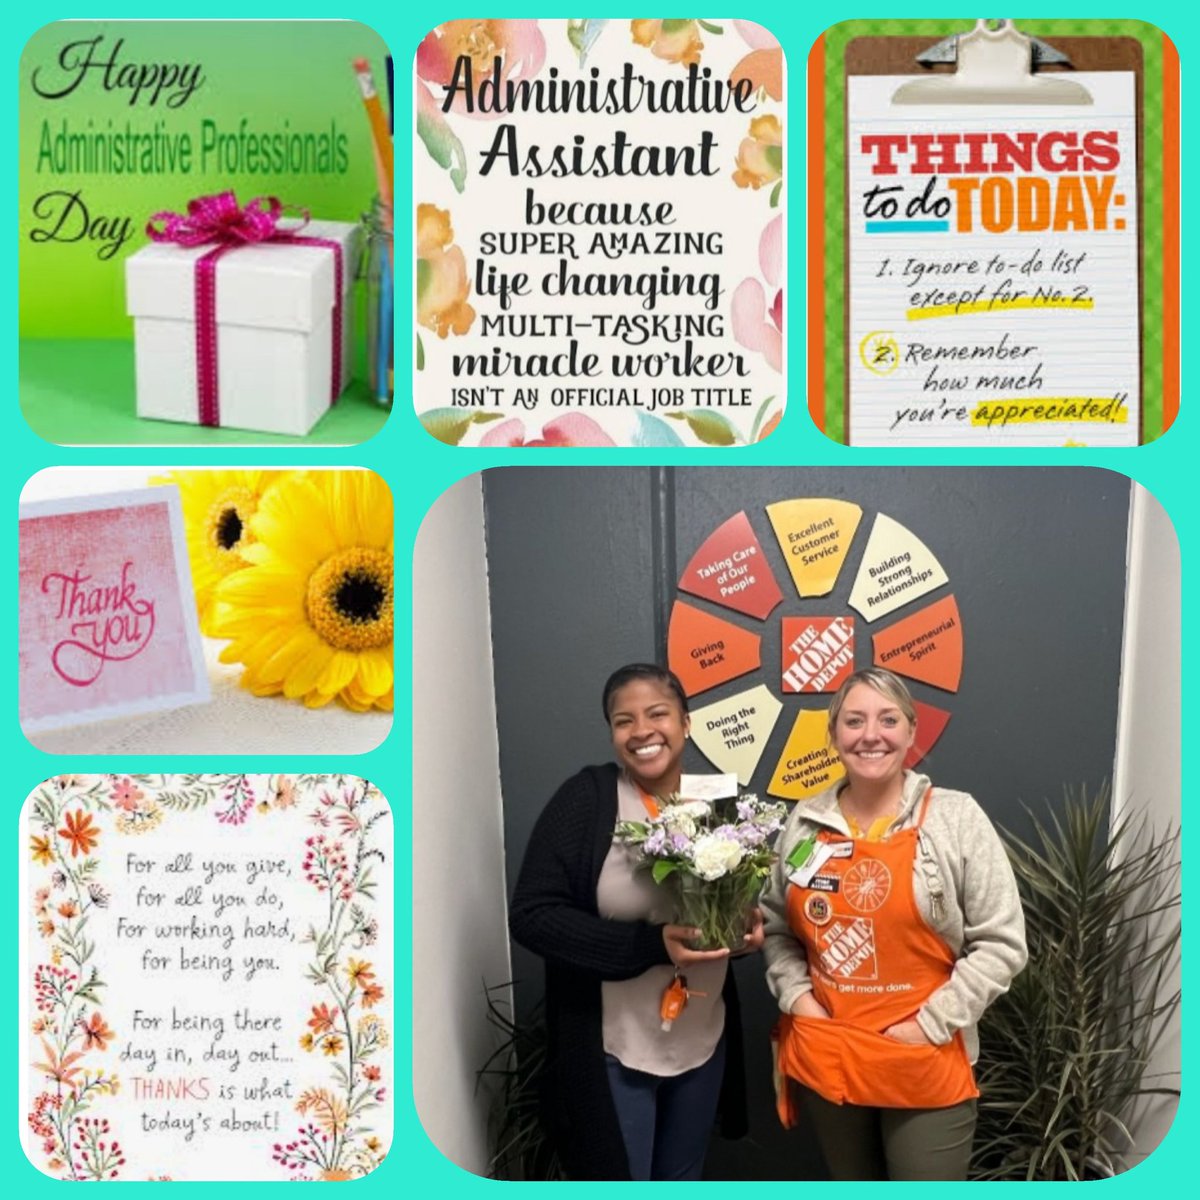 Happy Administrative Day💐 to our ASDS Lexi, you do so much to keep our store going, & somehow you always do it with a smile 😃. THANK YOU, for all that you do, we appreciate you, more than you know😇! 👏👏👏 #OneTeamOneDream @HillaryHyatt @kmn293 @THDMelaniebb